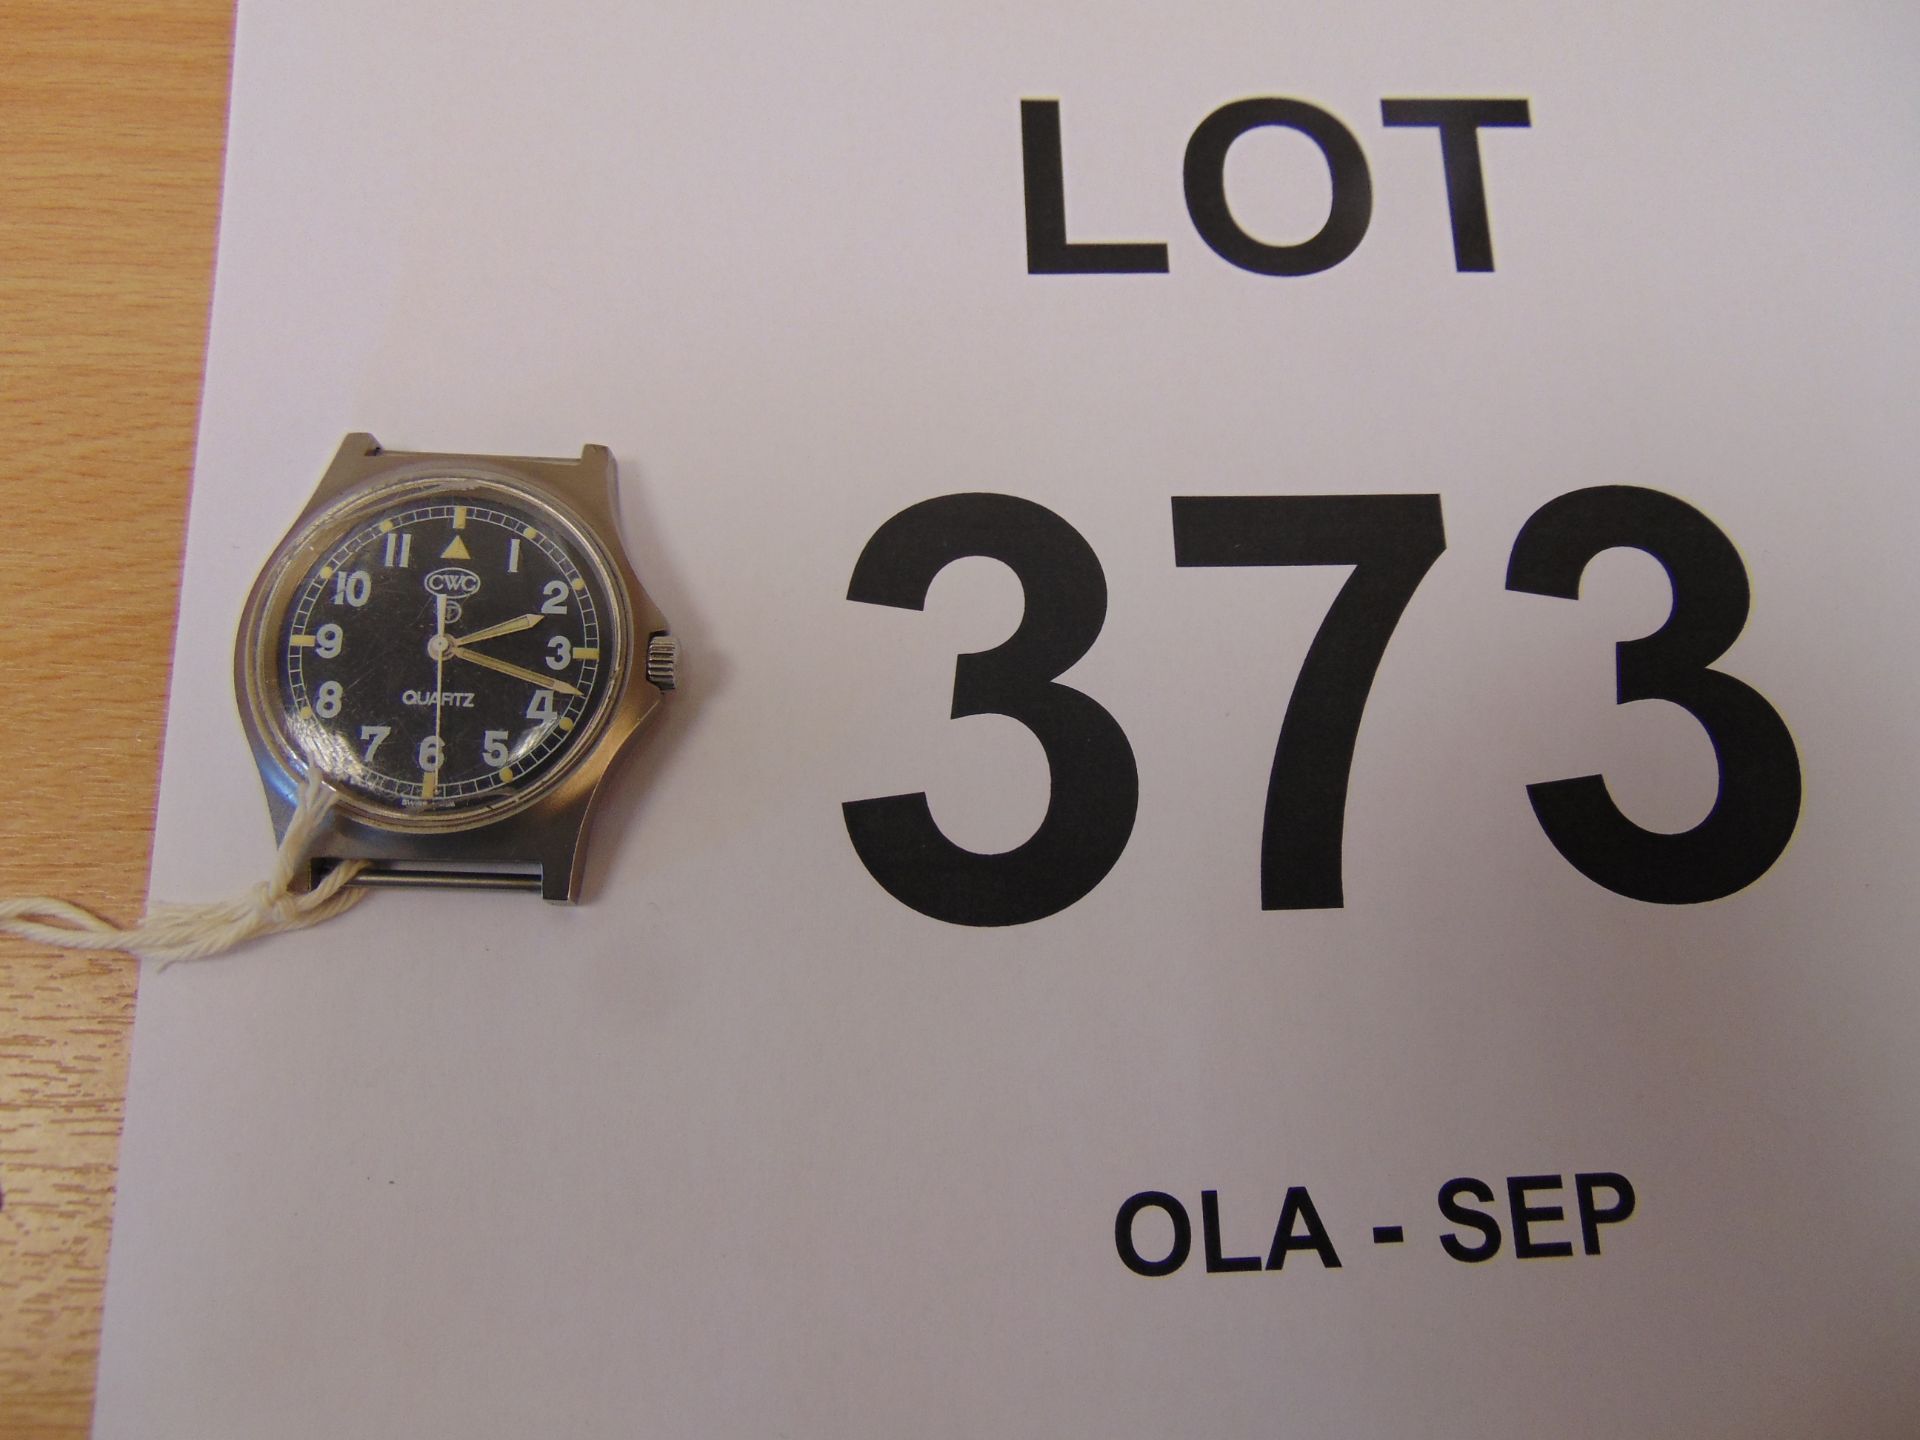 CWC 0555 R.Marines service watch with Nato Marks and broad arrow, small chip in glass, Date 1995 - Image 4 of 4